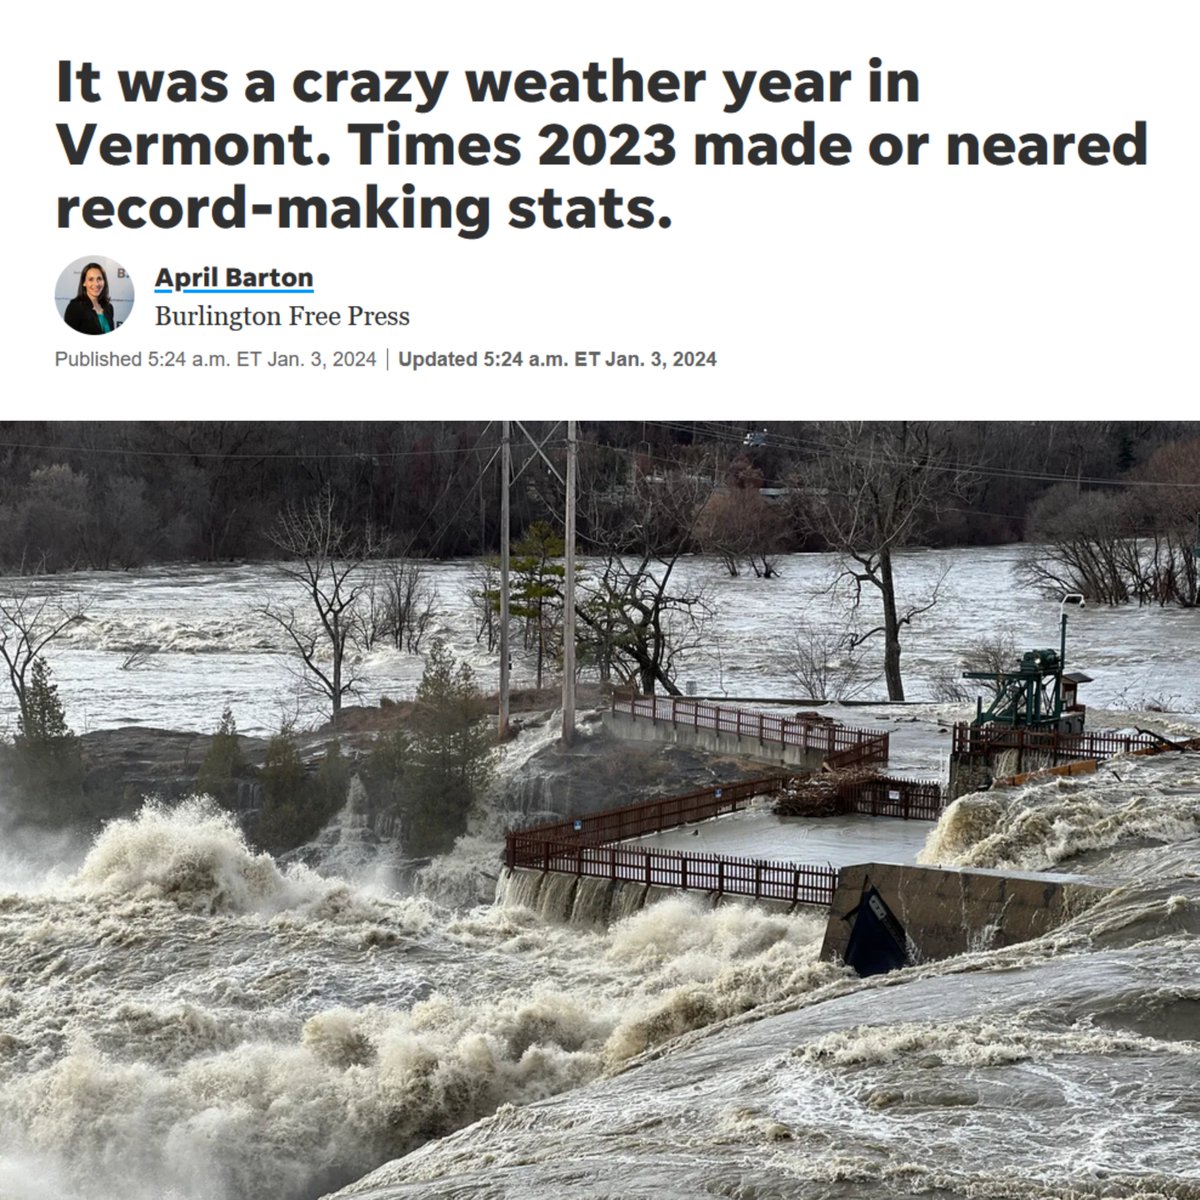 'The past year saw an abundance of extreme highs and lows, totals and natural disasters indicating climate change is impacting not only the treasured landscape but also the economy and well-being of Vermonters.'

Read more: burlingtonfreepress.com/story/news/loc…